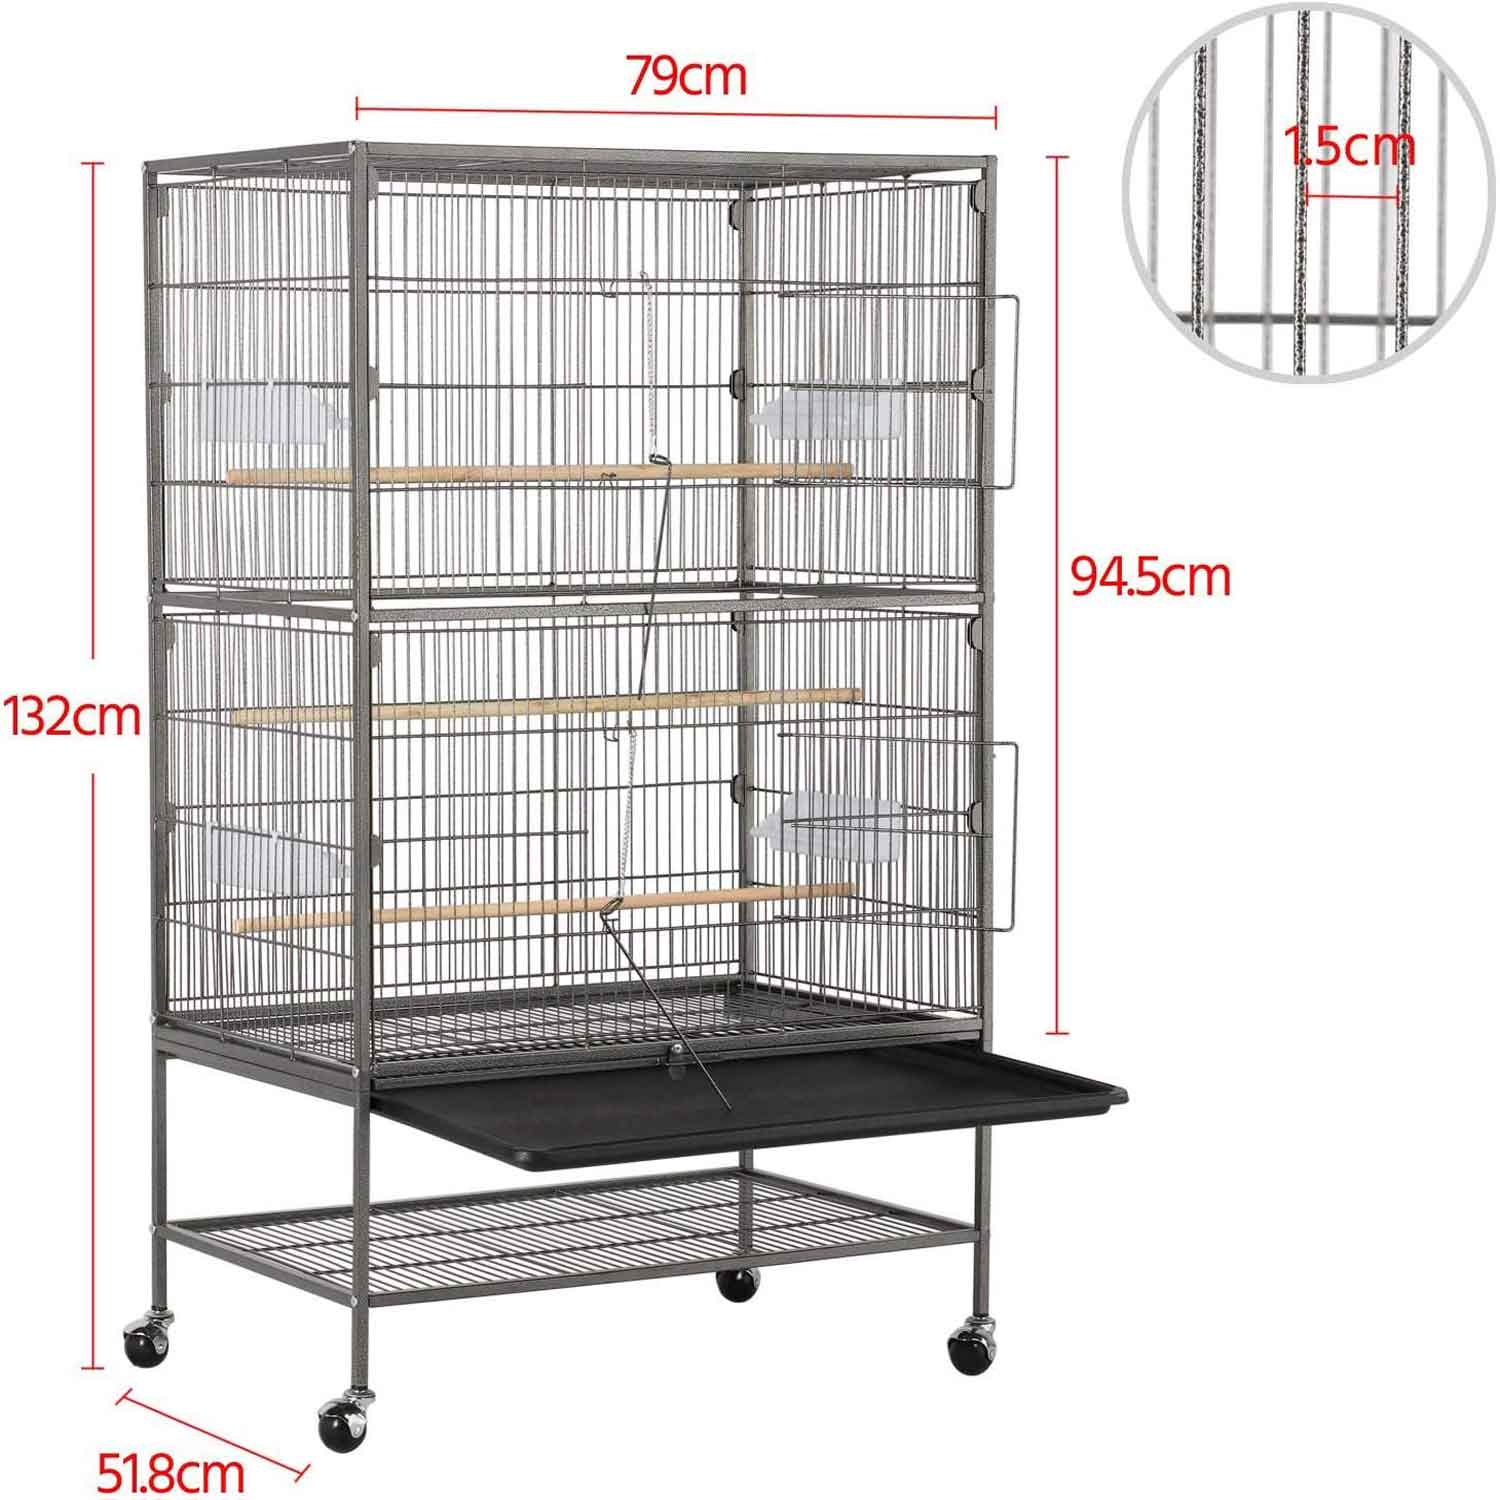 132cm Large Rolling Mobile Bird Cage Birdcage Finch Aviary Parrot Animals Playtop Stand Canary Finch - 0